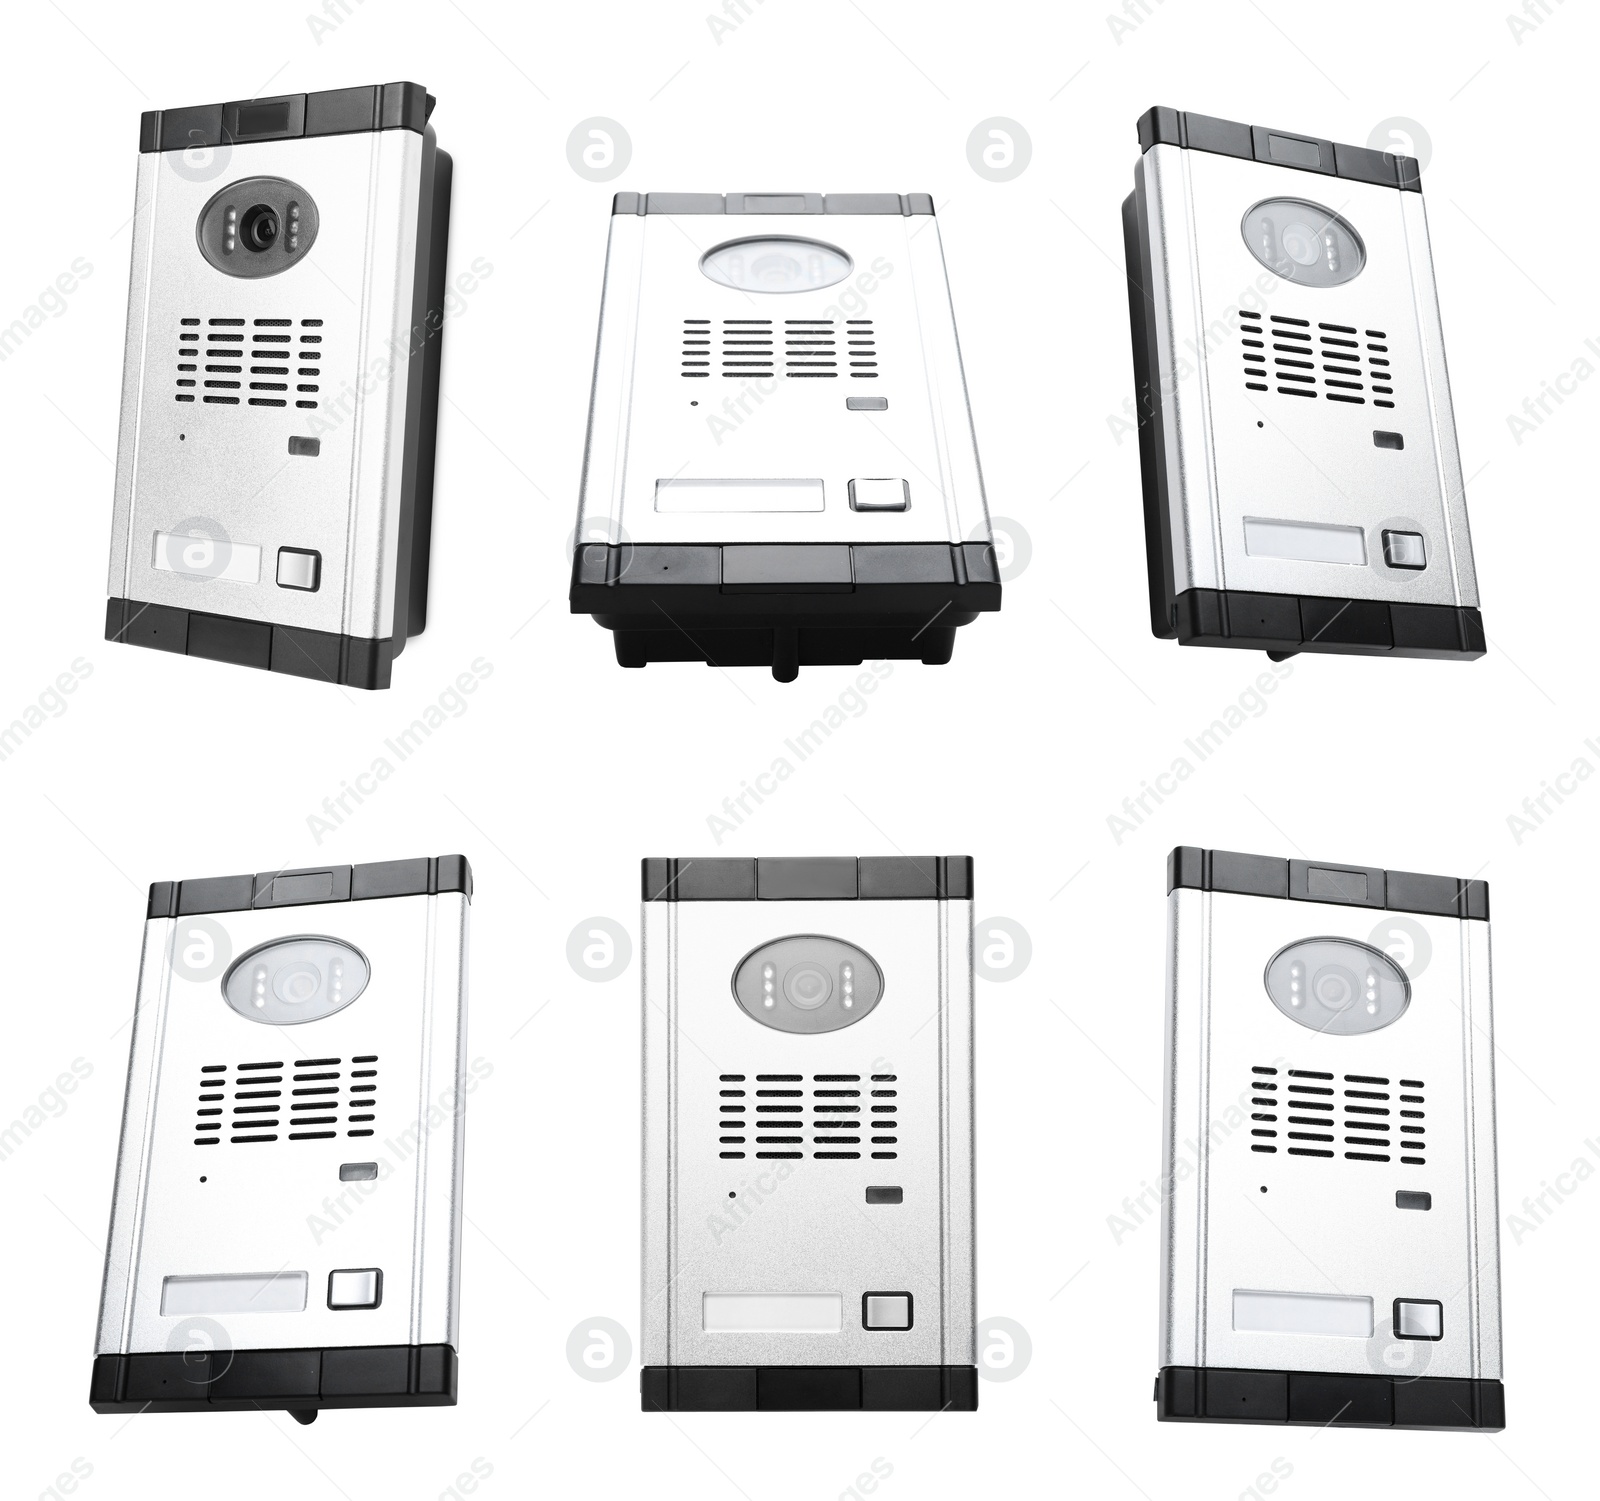 Image of Set with modern intercom door stations on white background